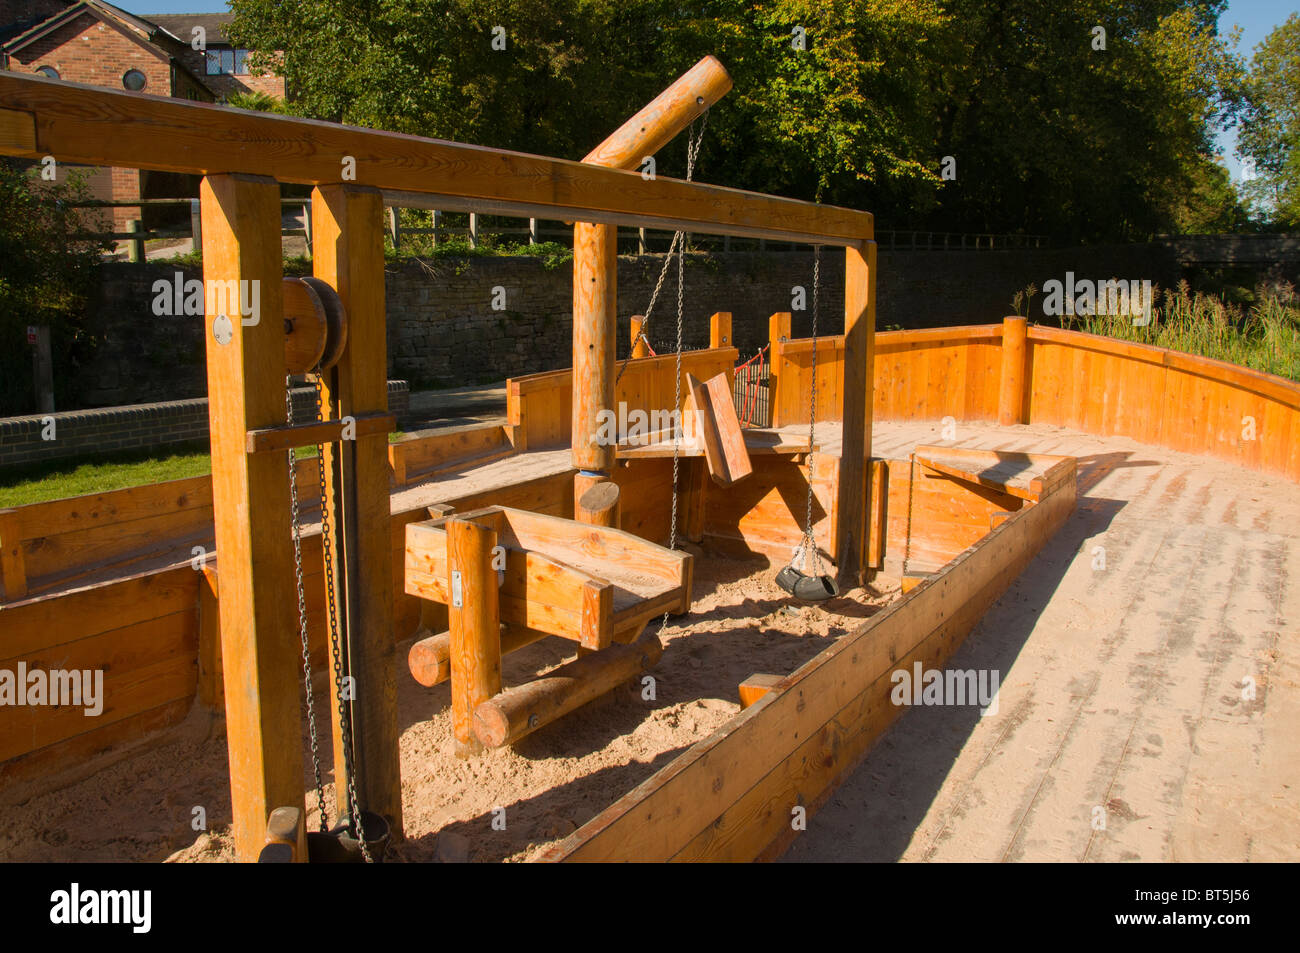 Childrens' sand play area in the shape of a canal narrowboat at Daisy Nook Country Park, Failsworth, Manchester, UK Stock Photo